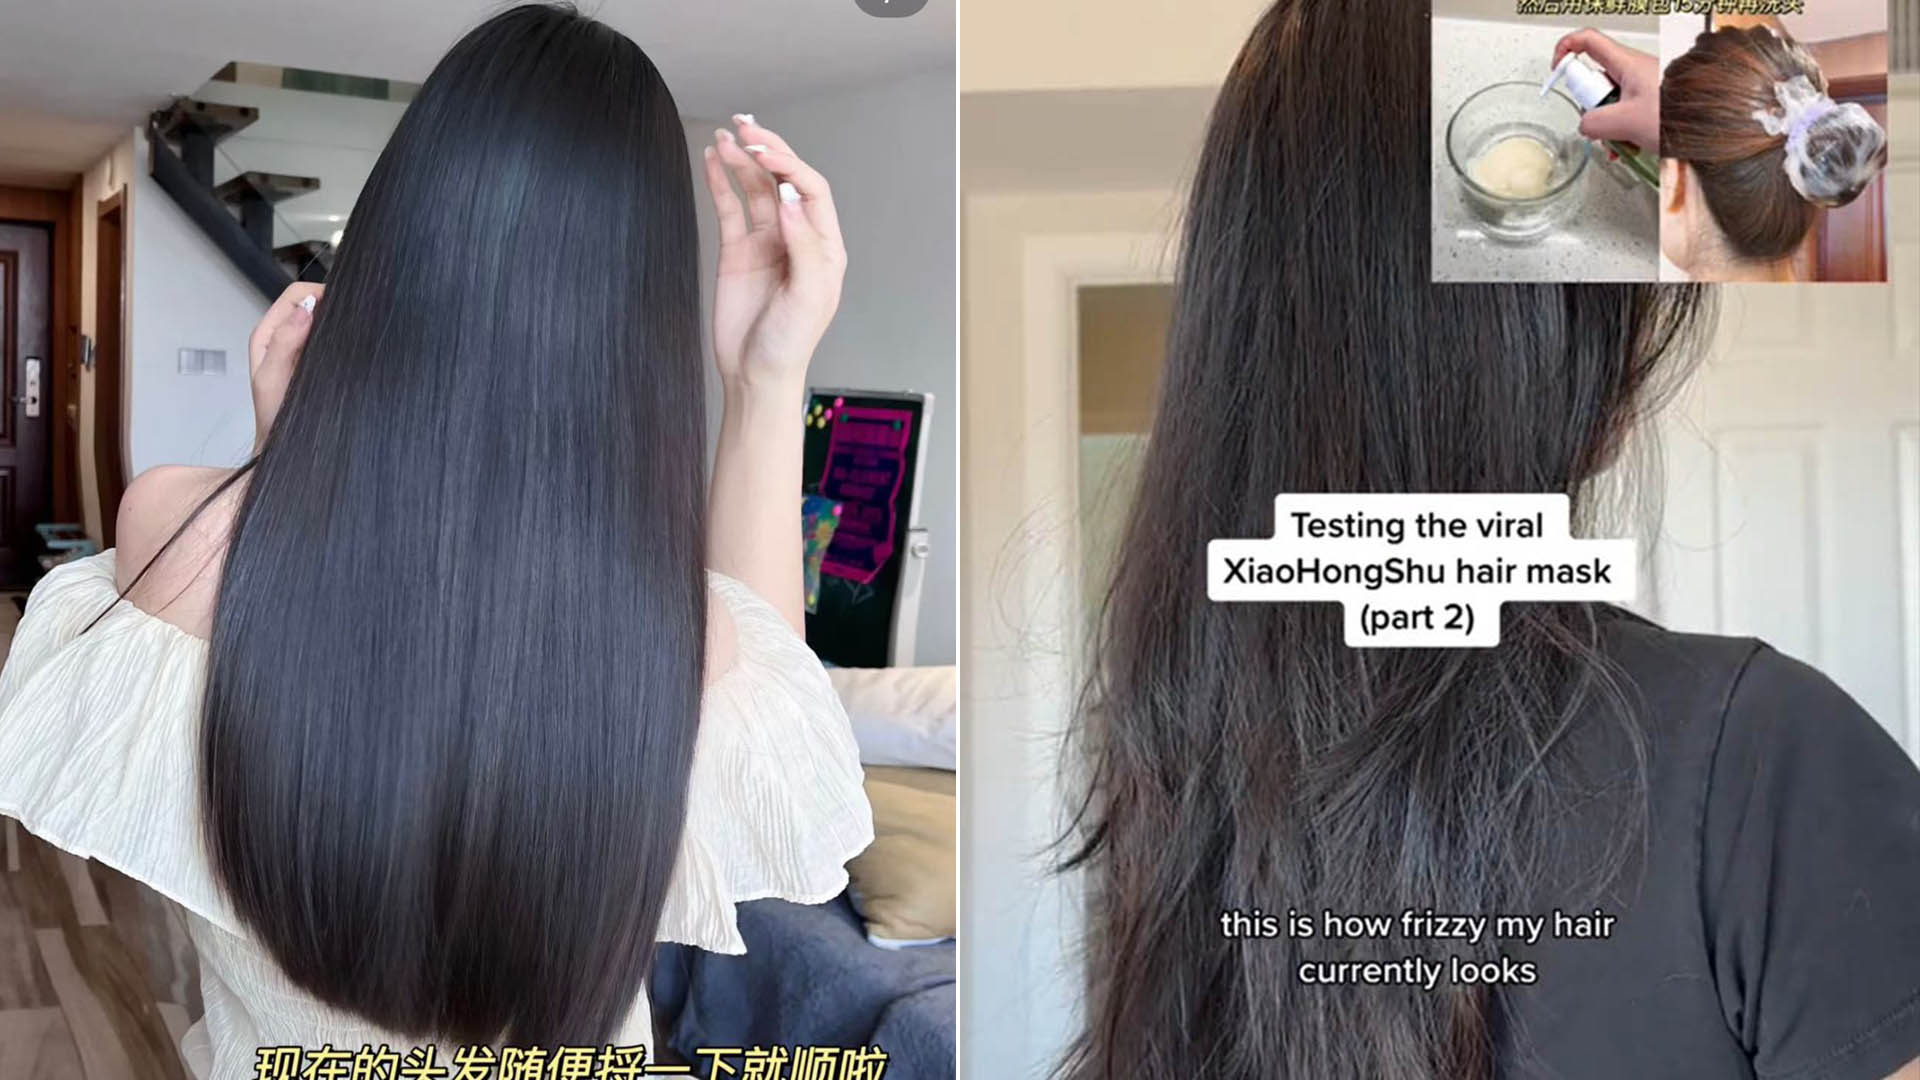 How To Have Smooth, Shiny 'Glass Hair' That's Trending On TikTok &  Xiaohongshu With Just 3 Haircare Products… And Cling Wrap - 8days